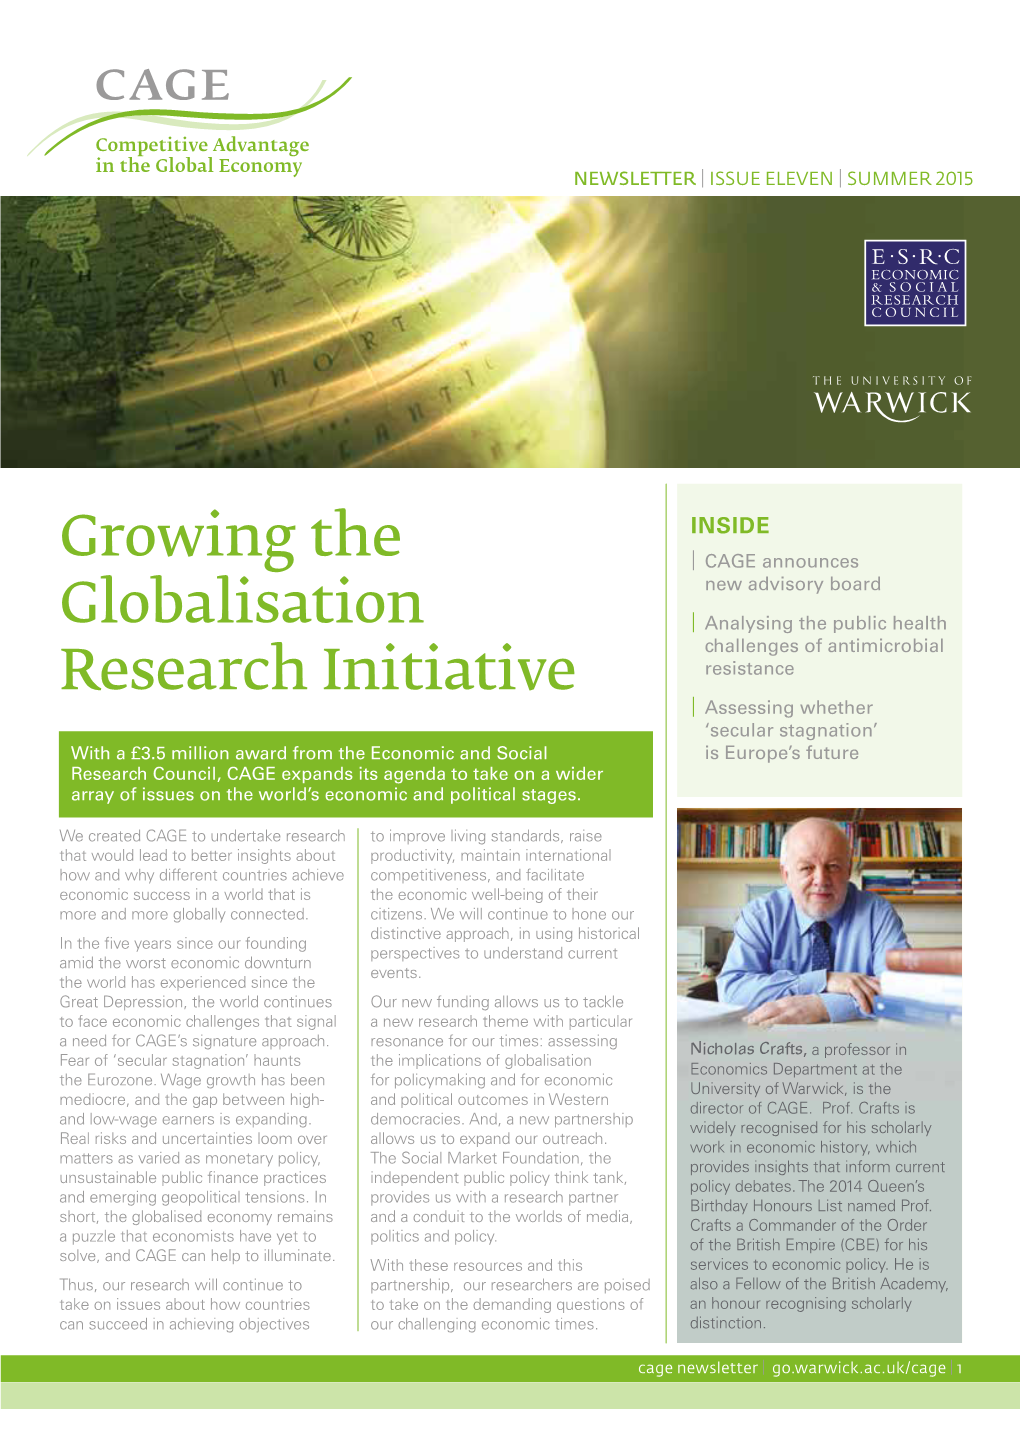 Growing the Globalisation Research Initiative